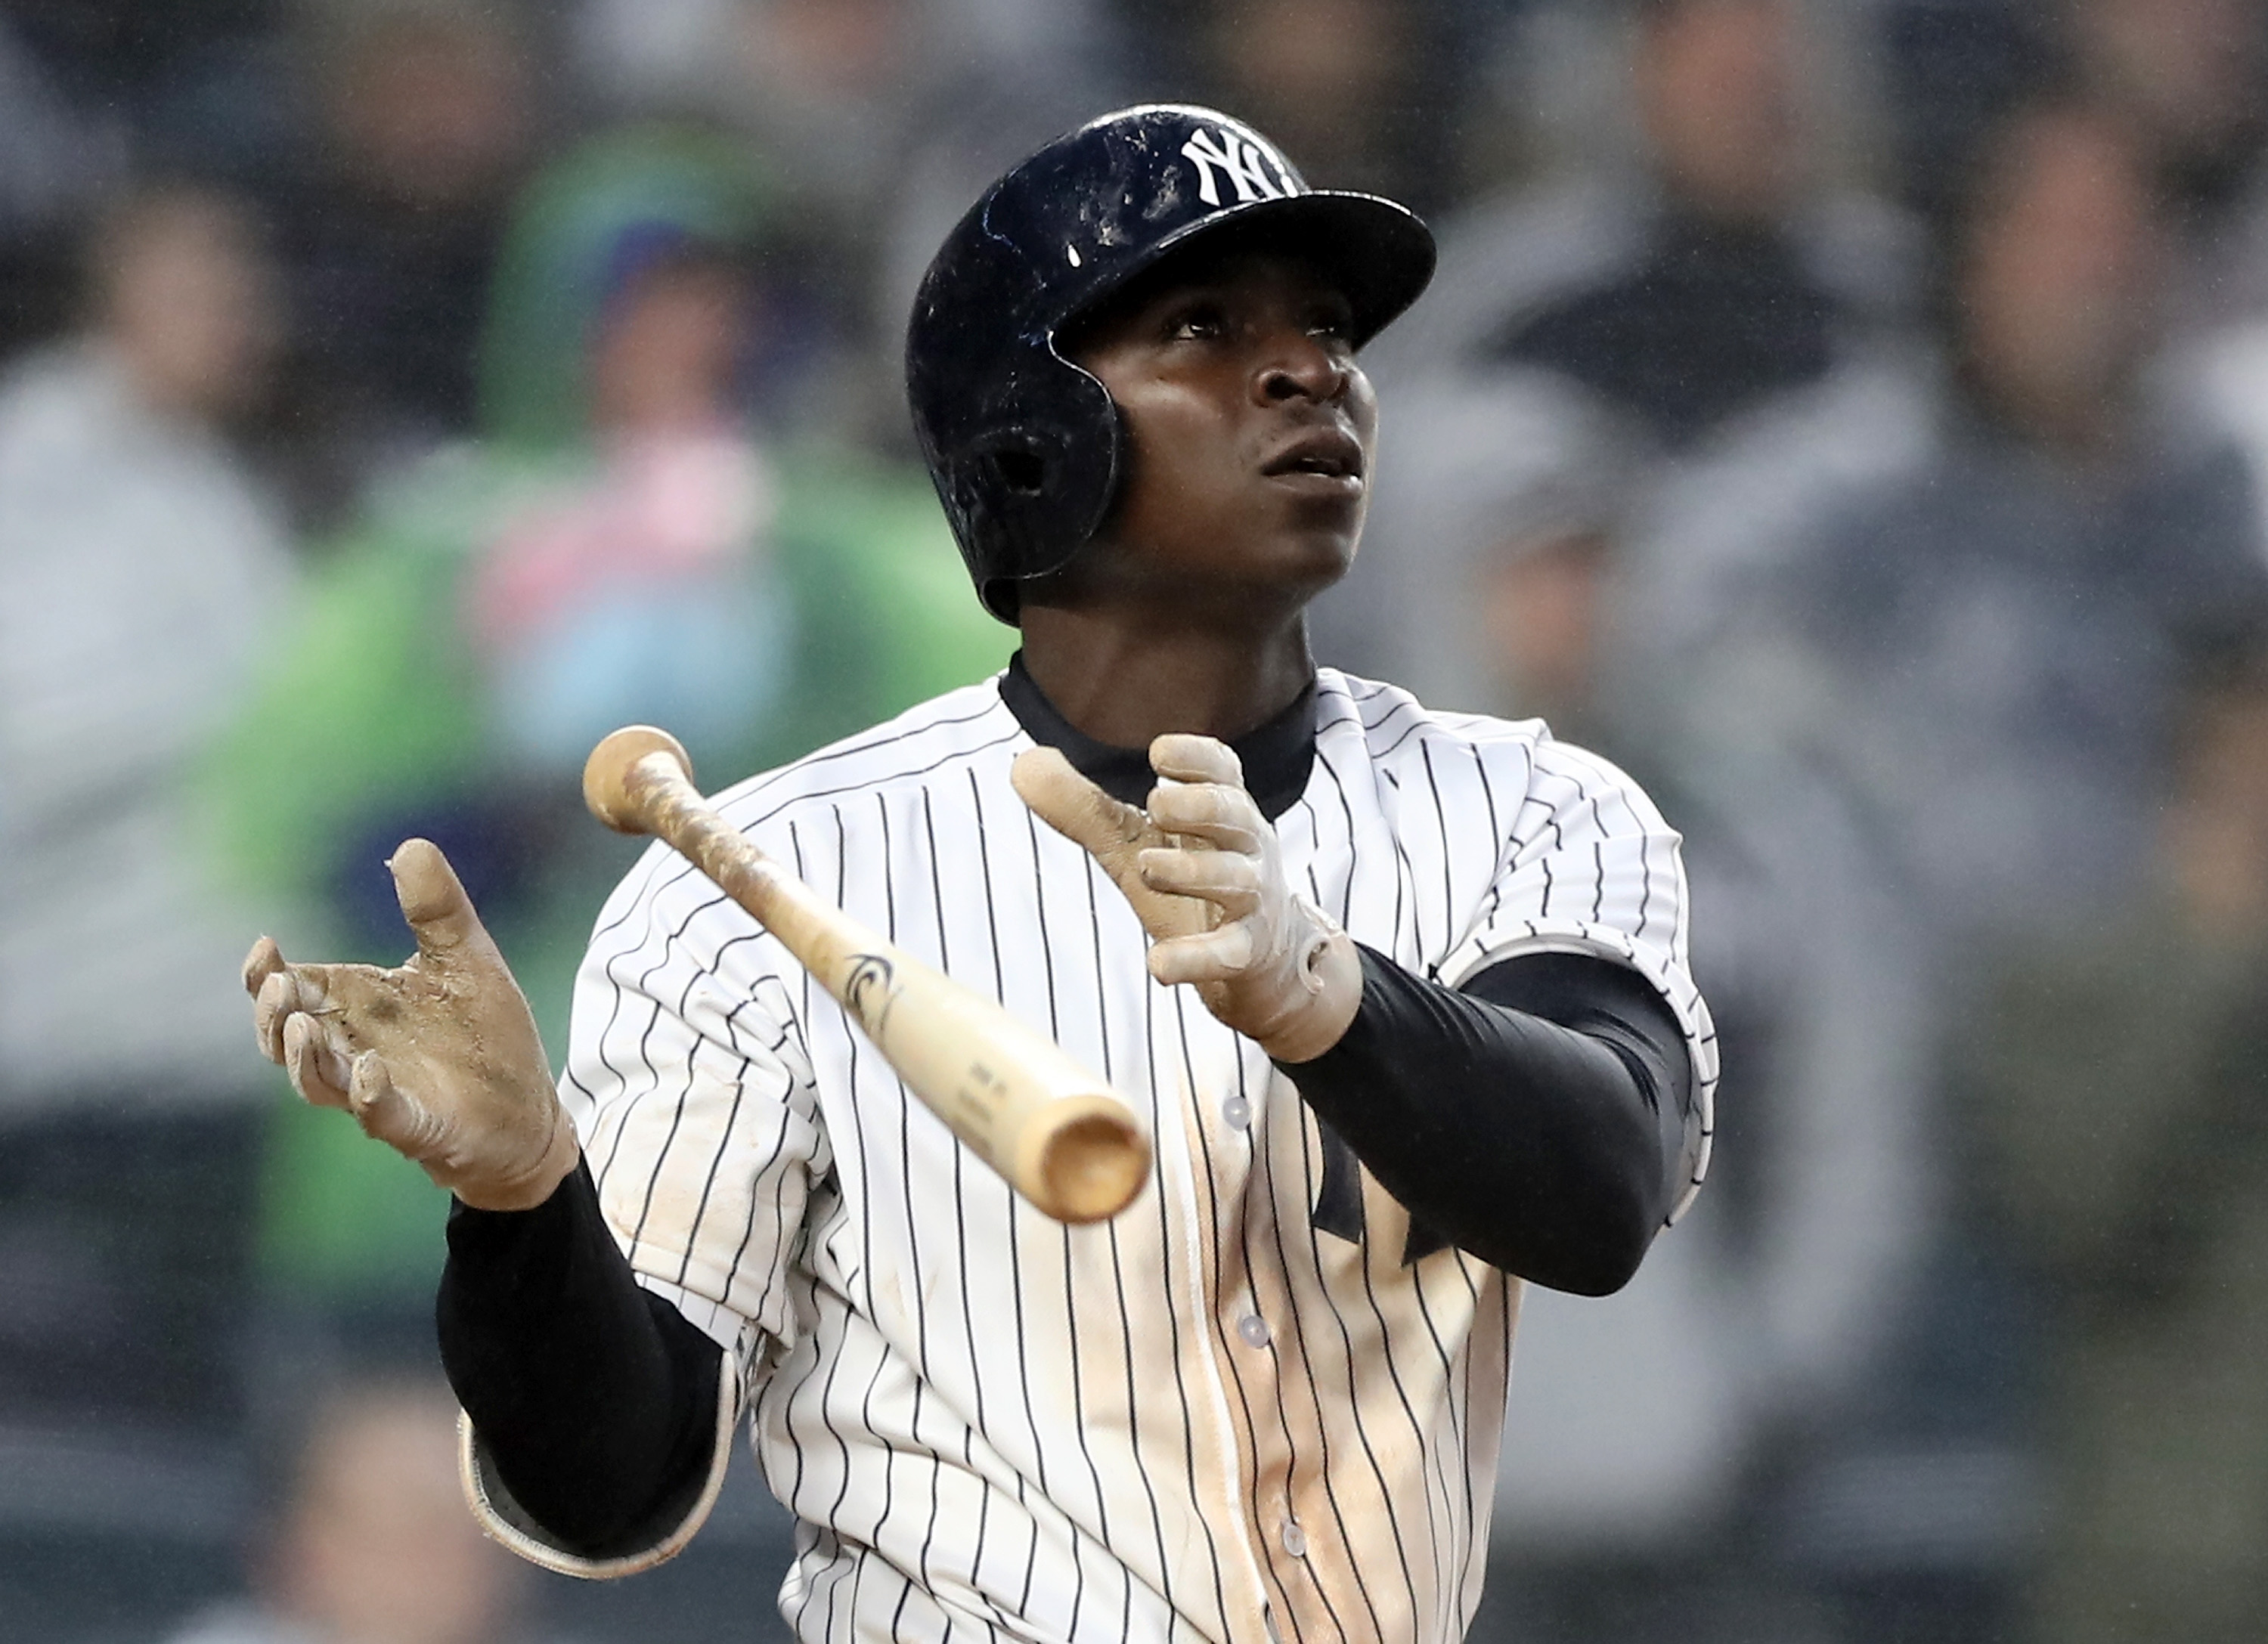 Getting Didi Gregorius back will be huge for the Yankees